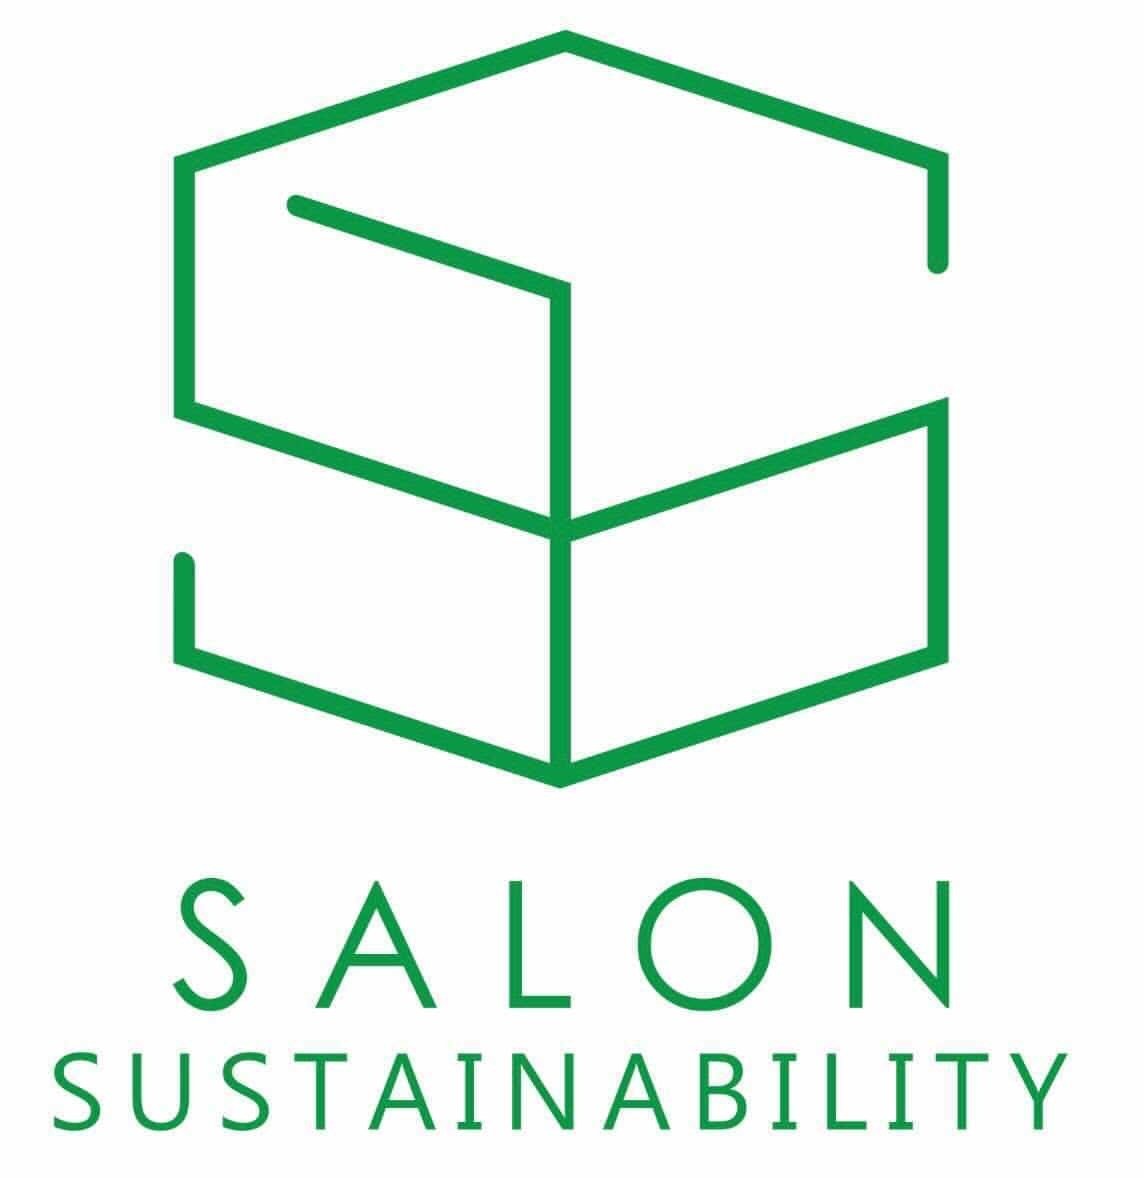 We are part of SalonSustanability, our waste it’s 95% recycled